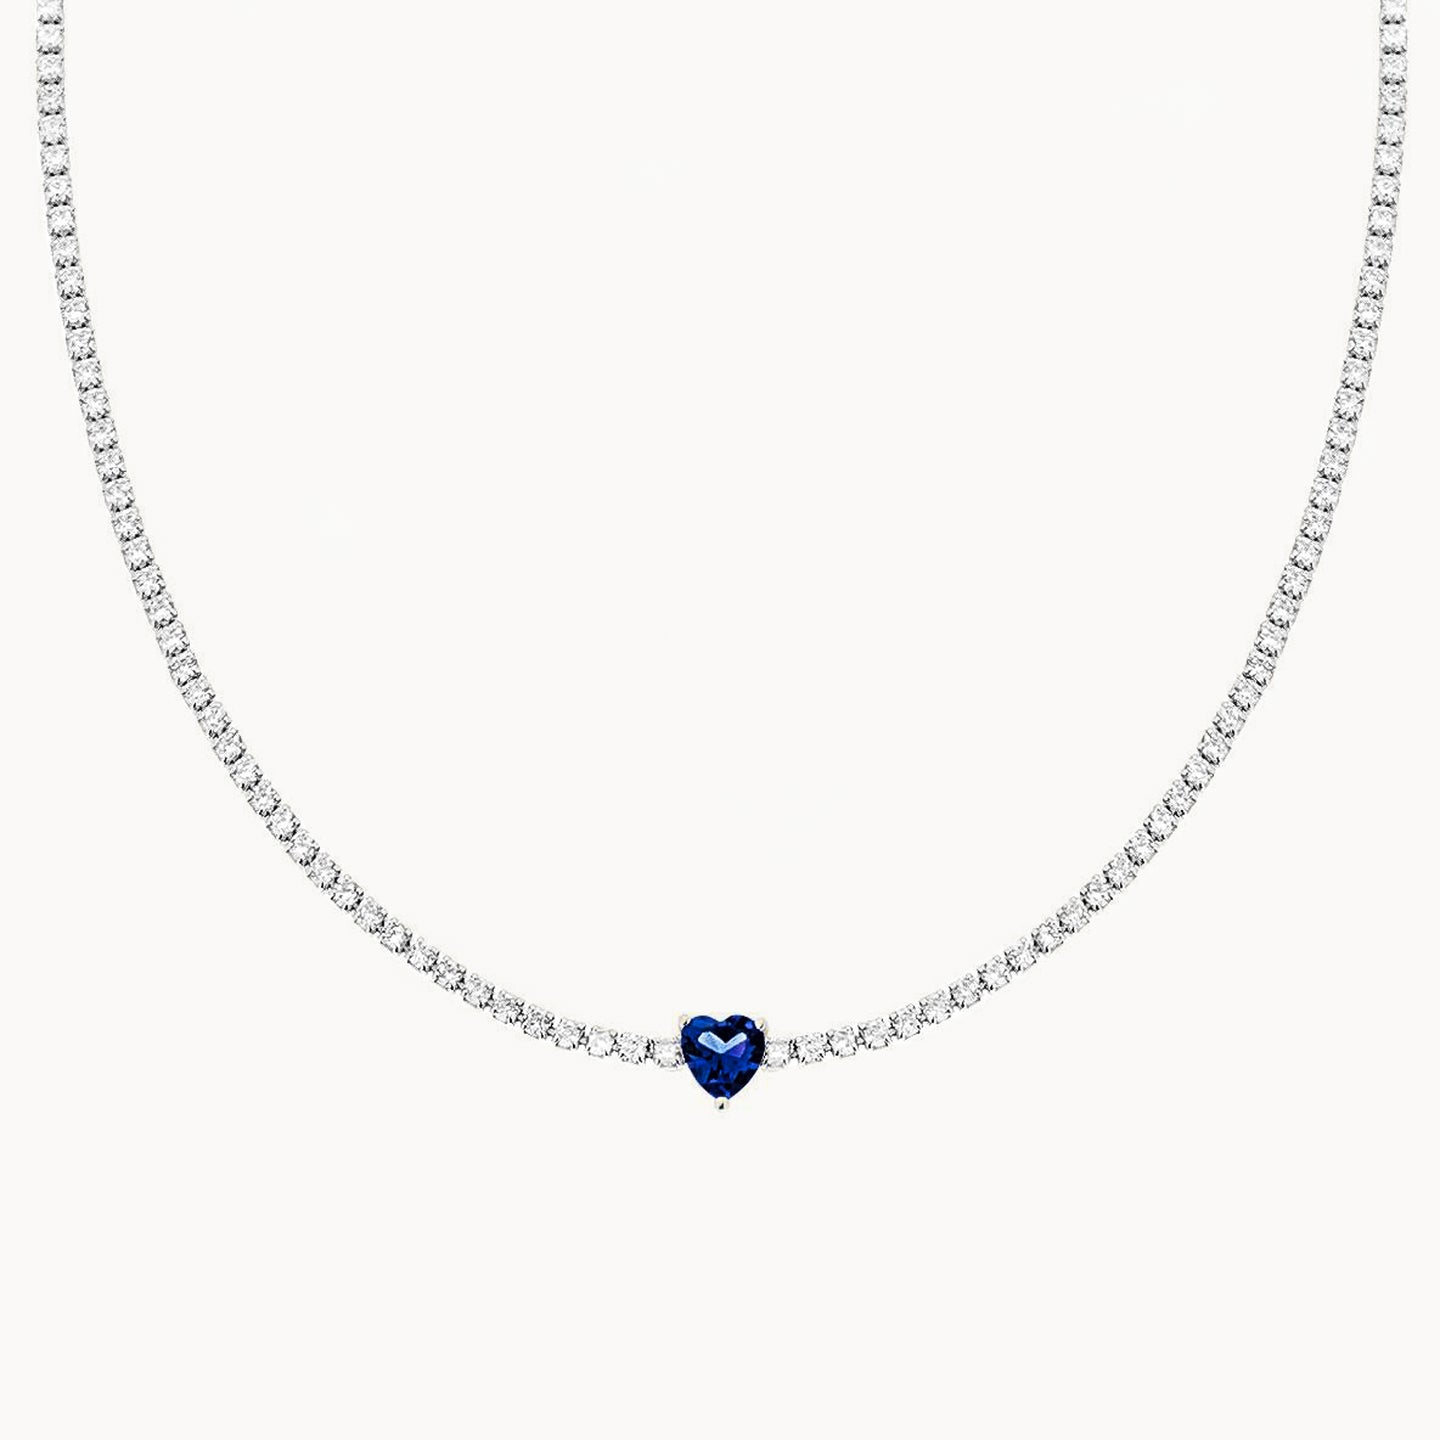 Sapphire Heart Tennis Necklace | Rhodium Plated 925 Sterling Silver